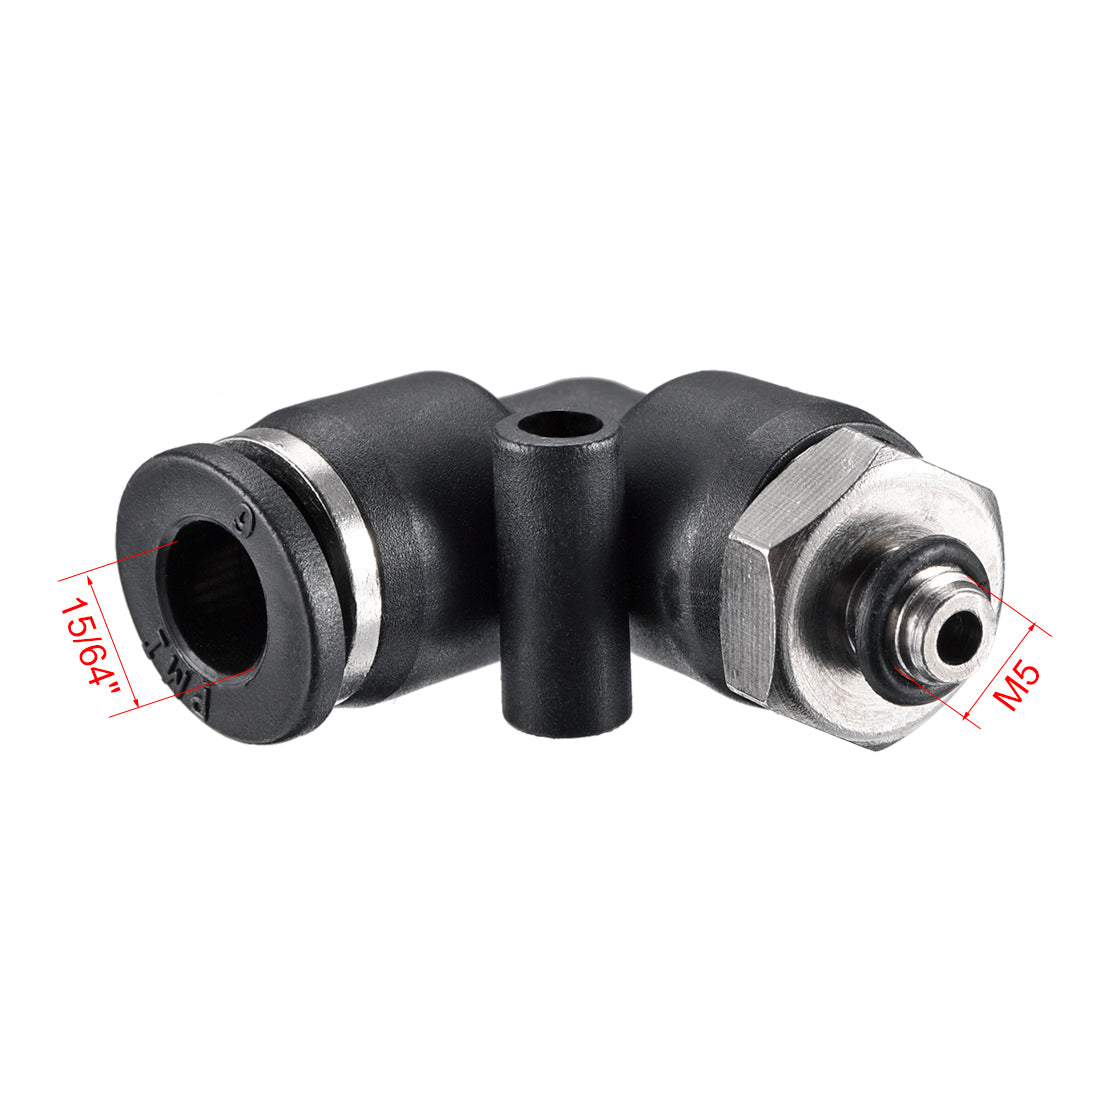 uxcell Uxcell PL6-M5 Pneumatic Push to Connect Fitting, Male Elbow - 15/64" Tube OD x M5 Thread  Tube Fitting 4pcs